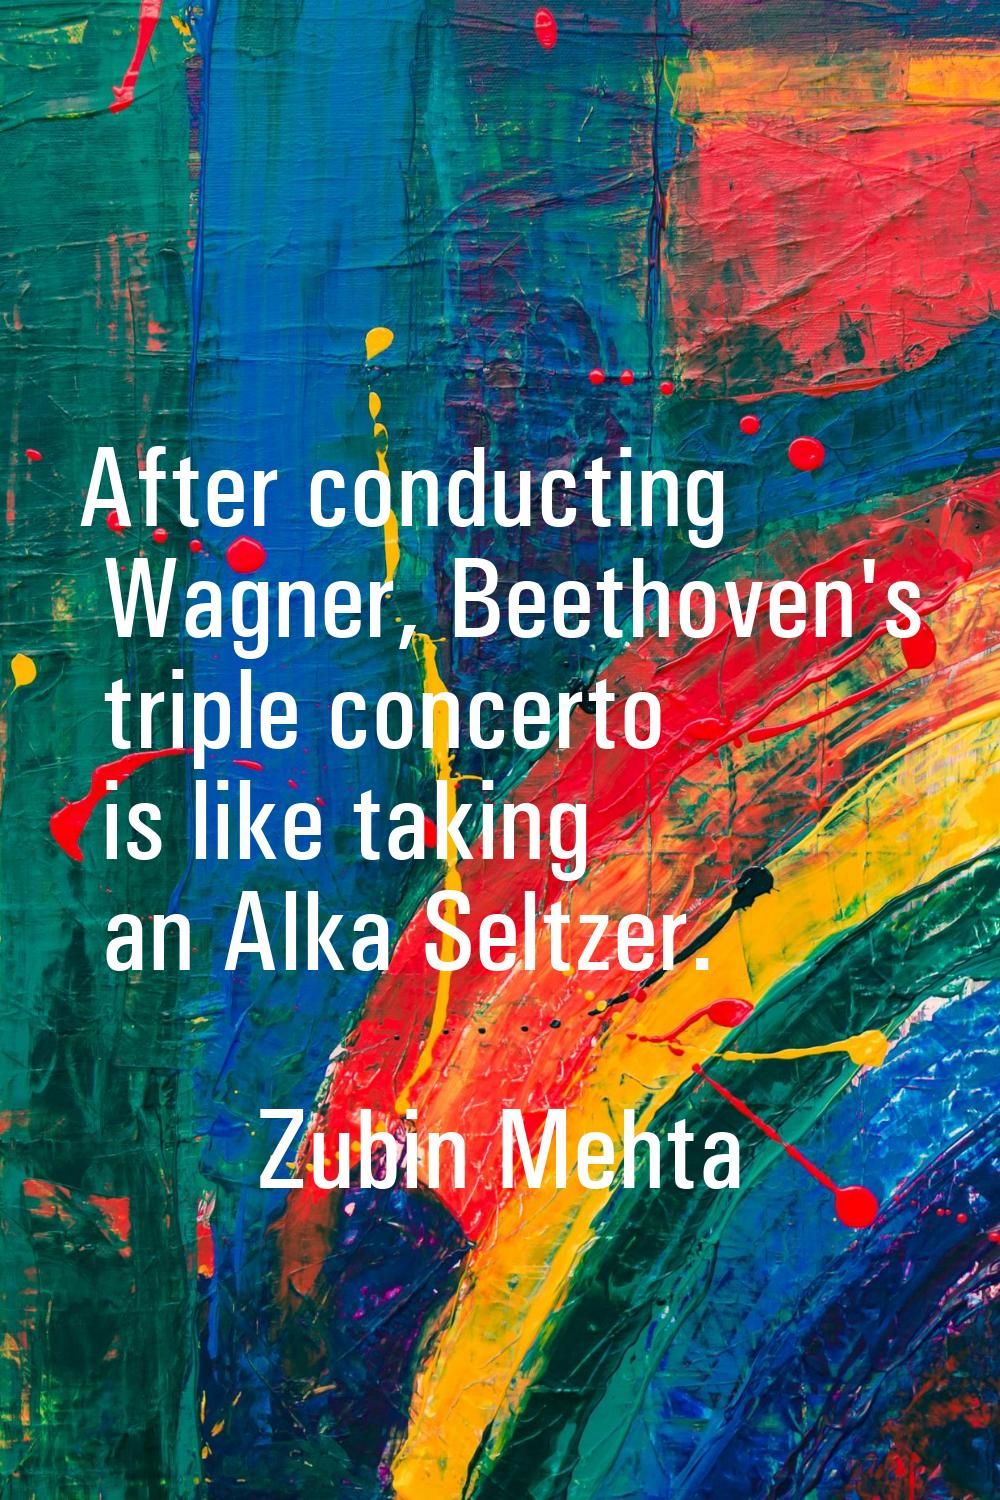 After conducting Wagner, Beethoven's triple concerto is like taking an Alka Seltzer.